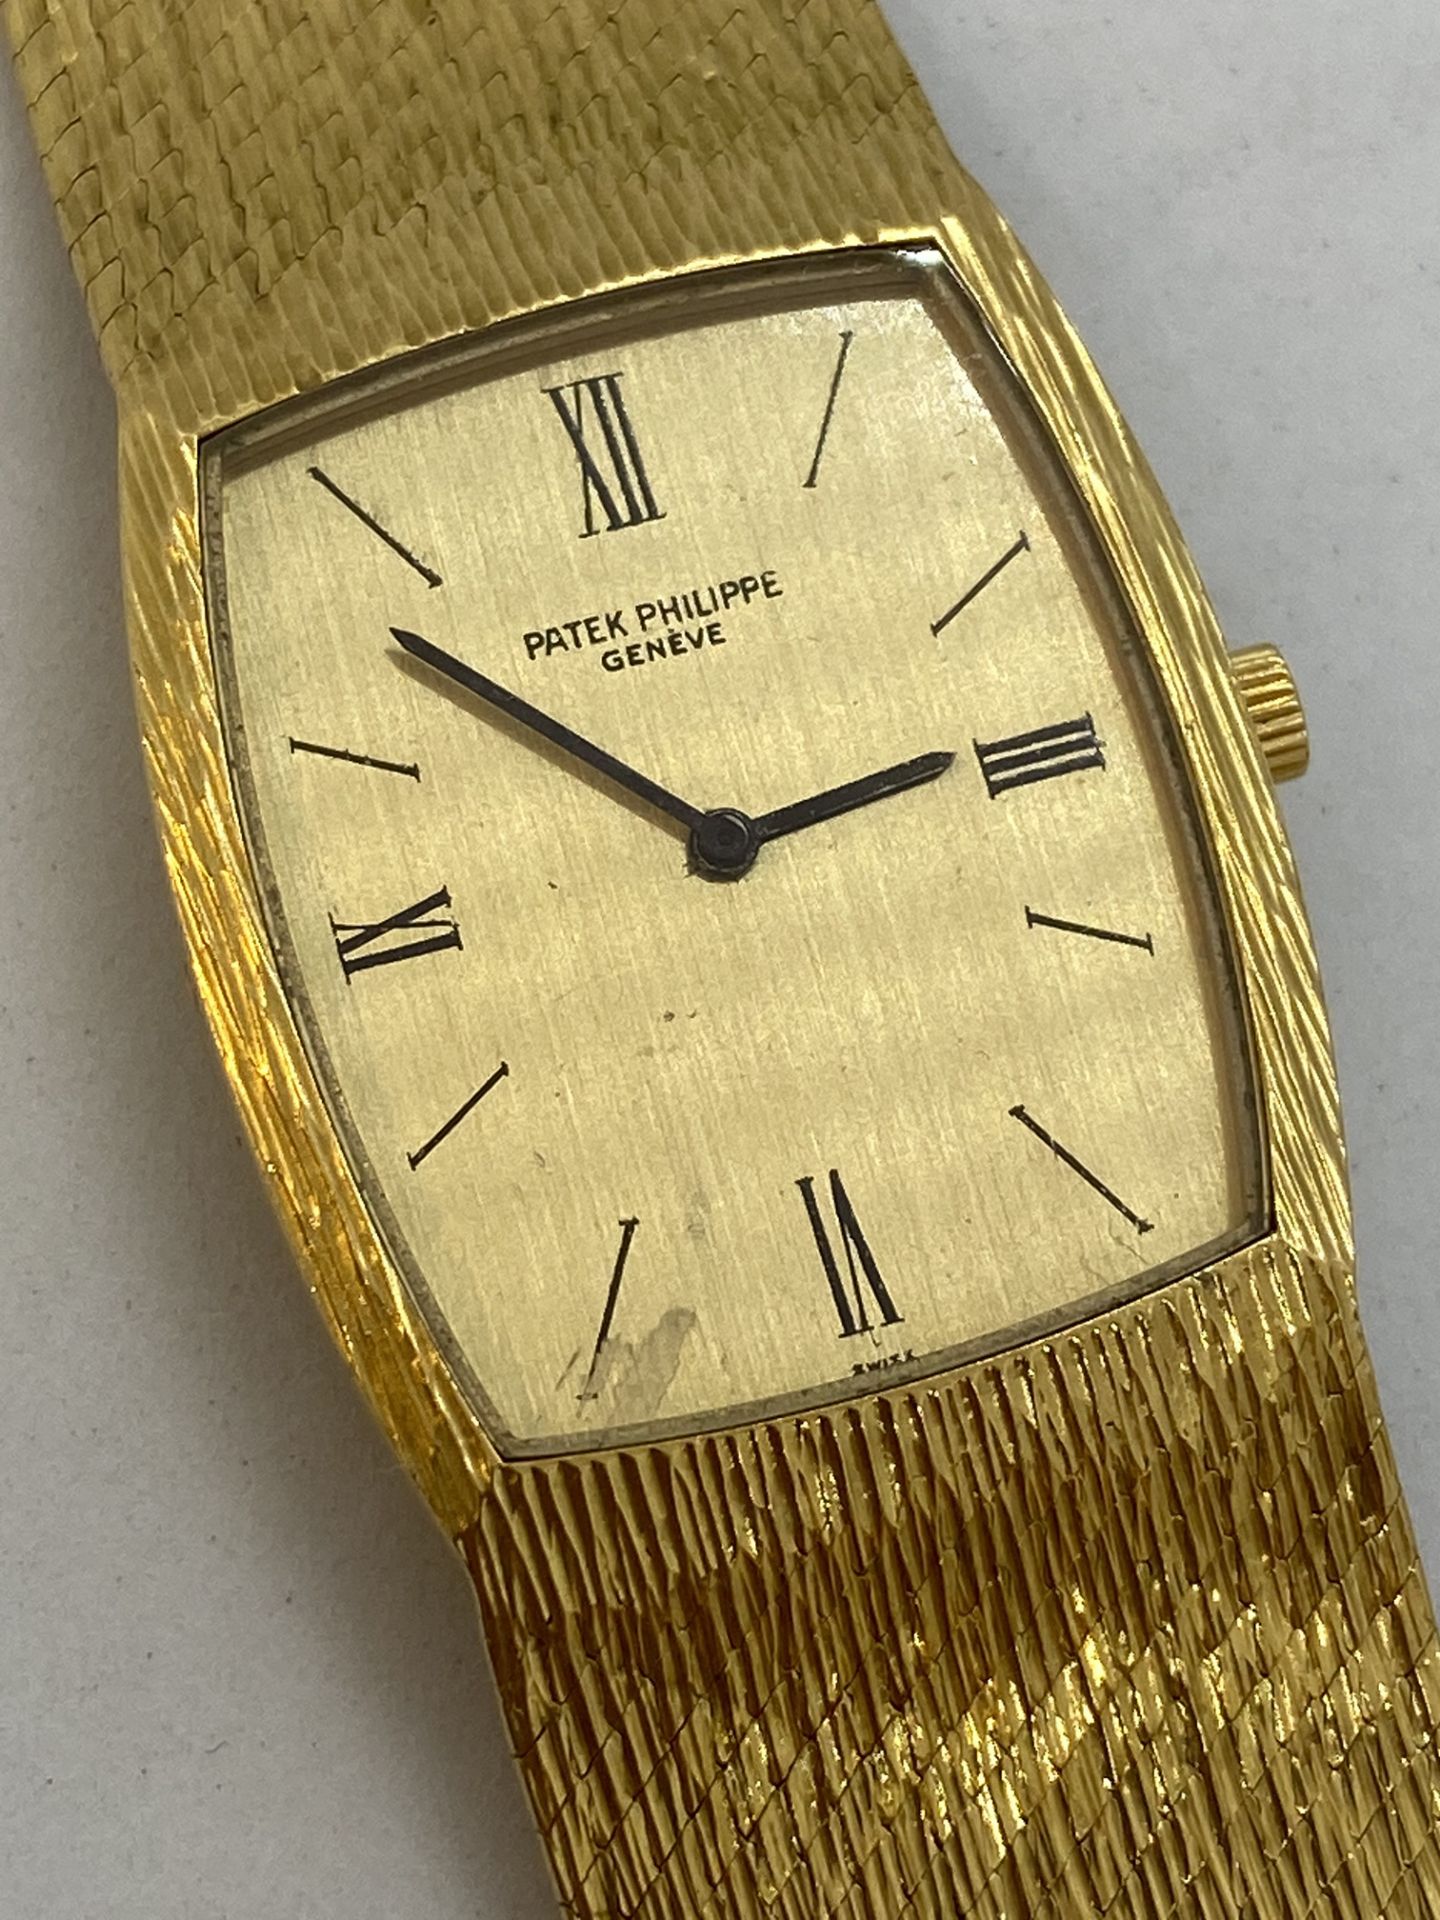 PHILLIPE PATEK 18ct GOLD WATCH - 82 GRAMS APPROX - Image 11 of 11